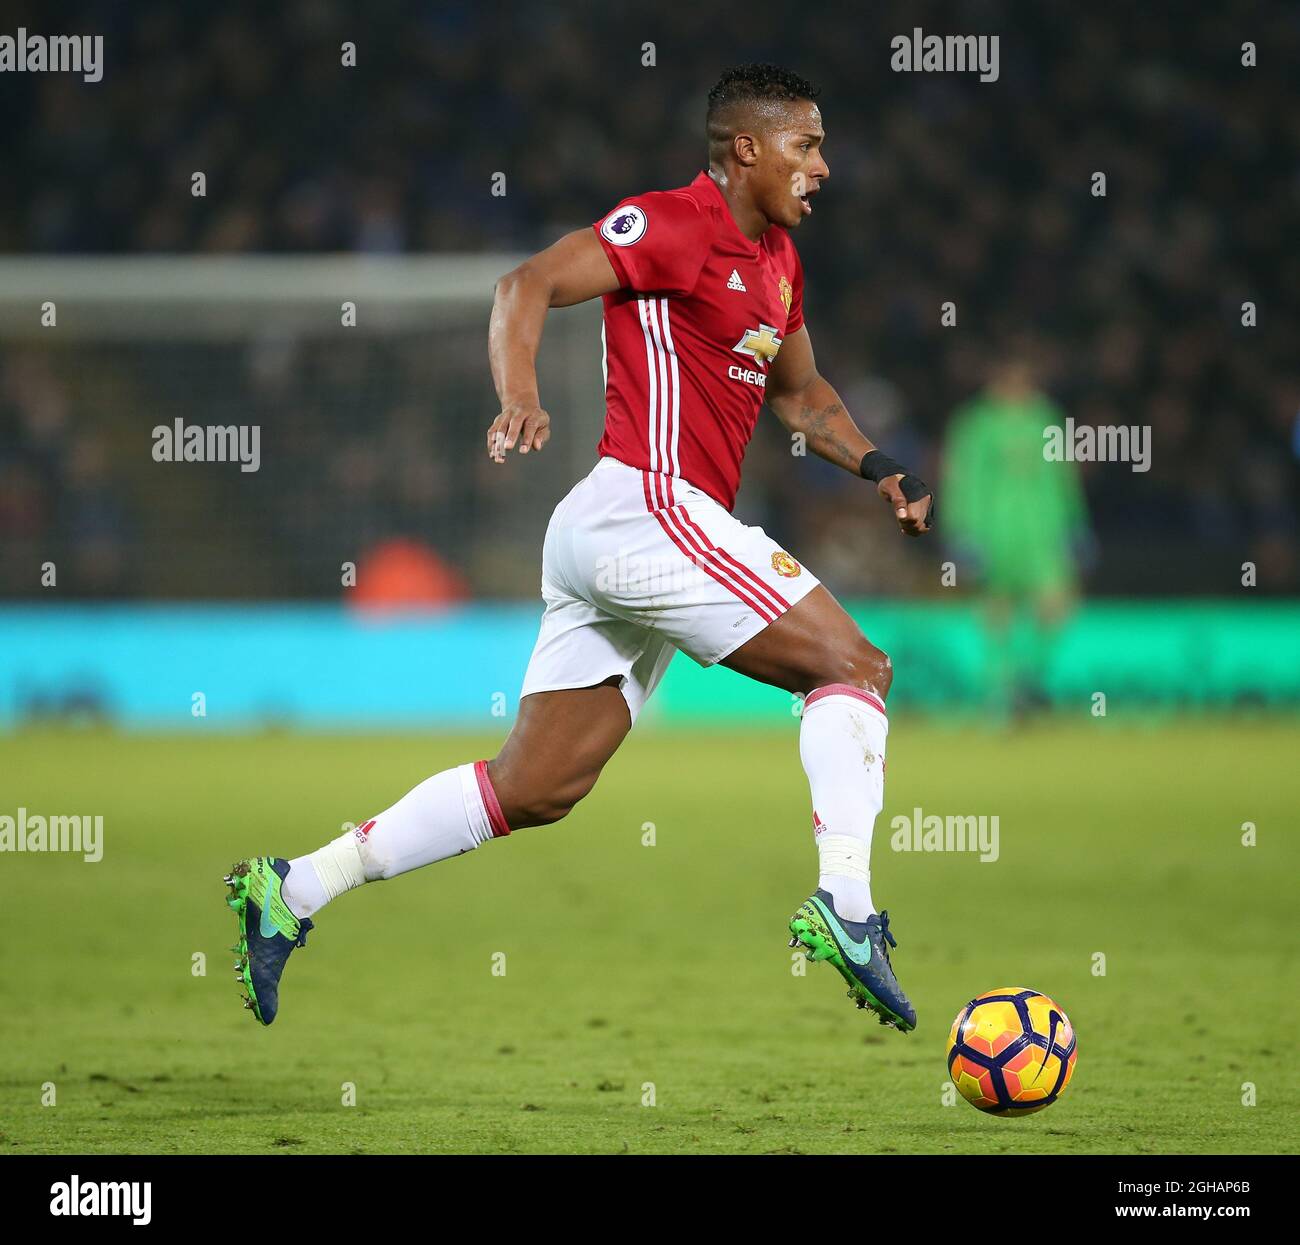 Manchester United's Antonio Valencia in action during the Premier League match at the King Power Stadium, Leicester. Picture date February 5th, 2017 Pic David Klein/Sportimage via PA Images Stock Photo